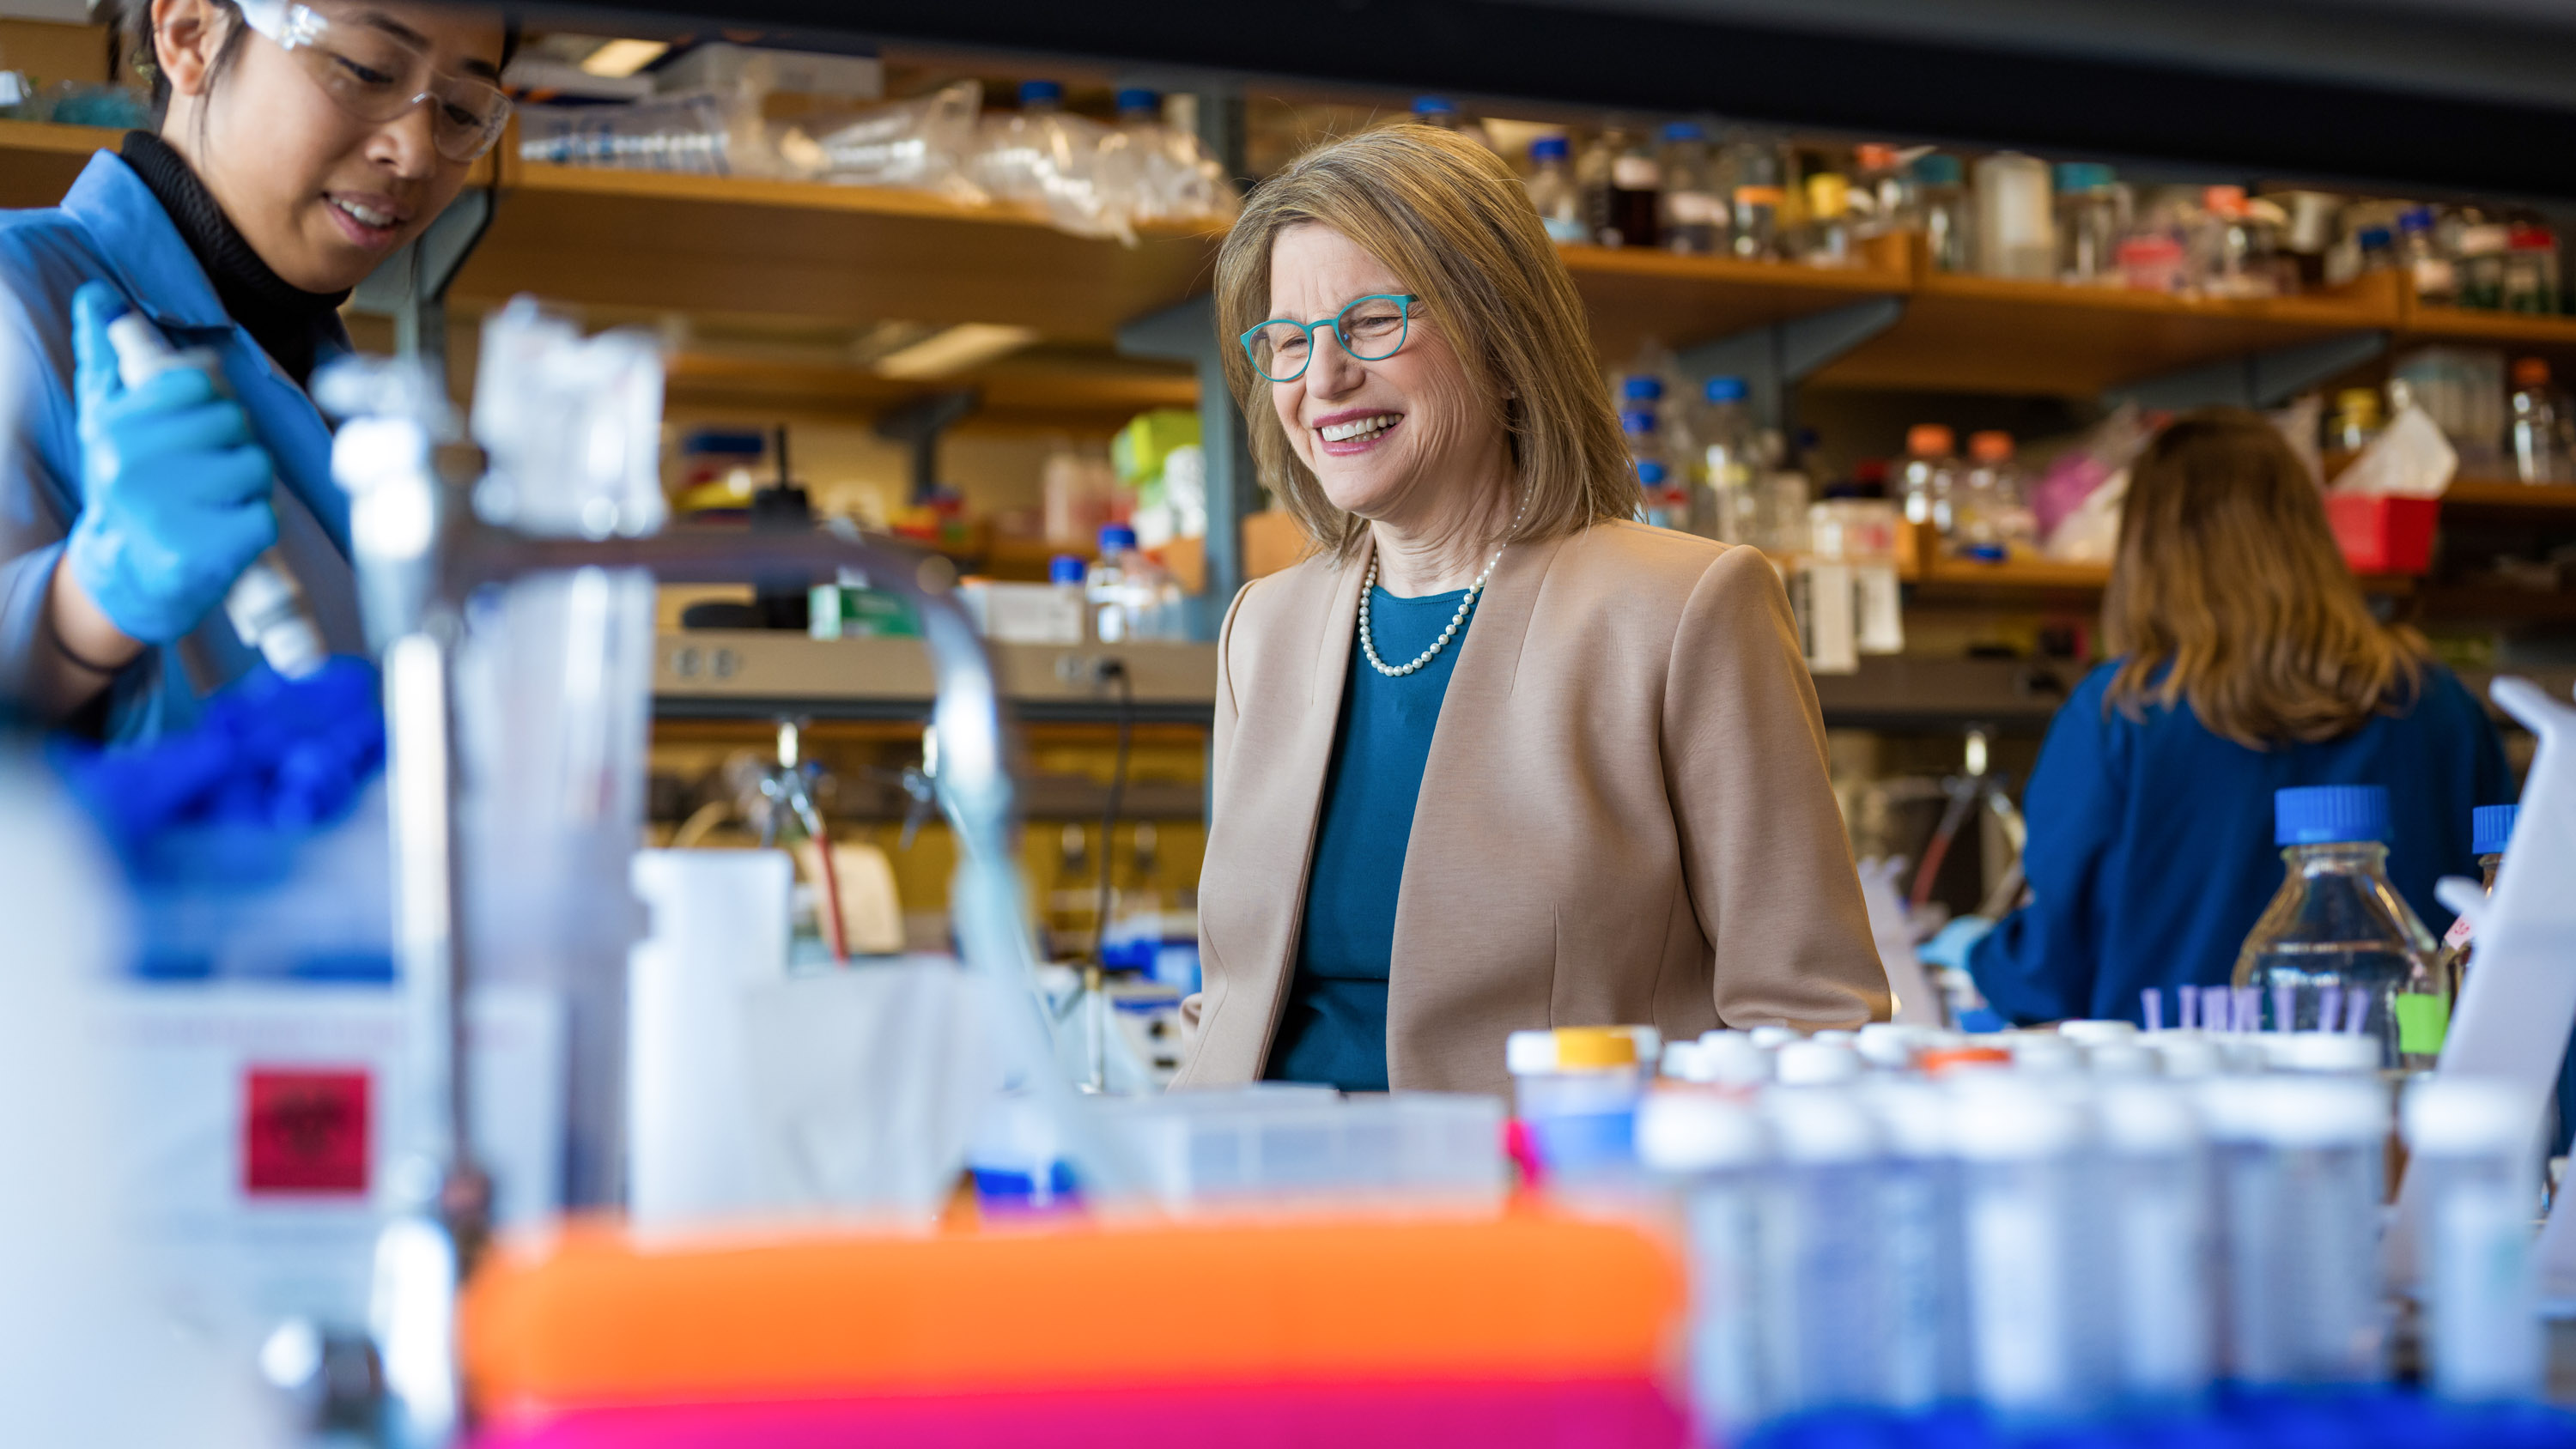 Sally Kornbluth visits a lab where scientists are working